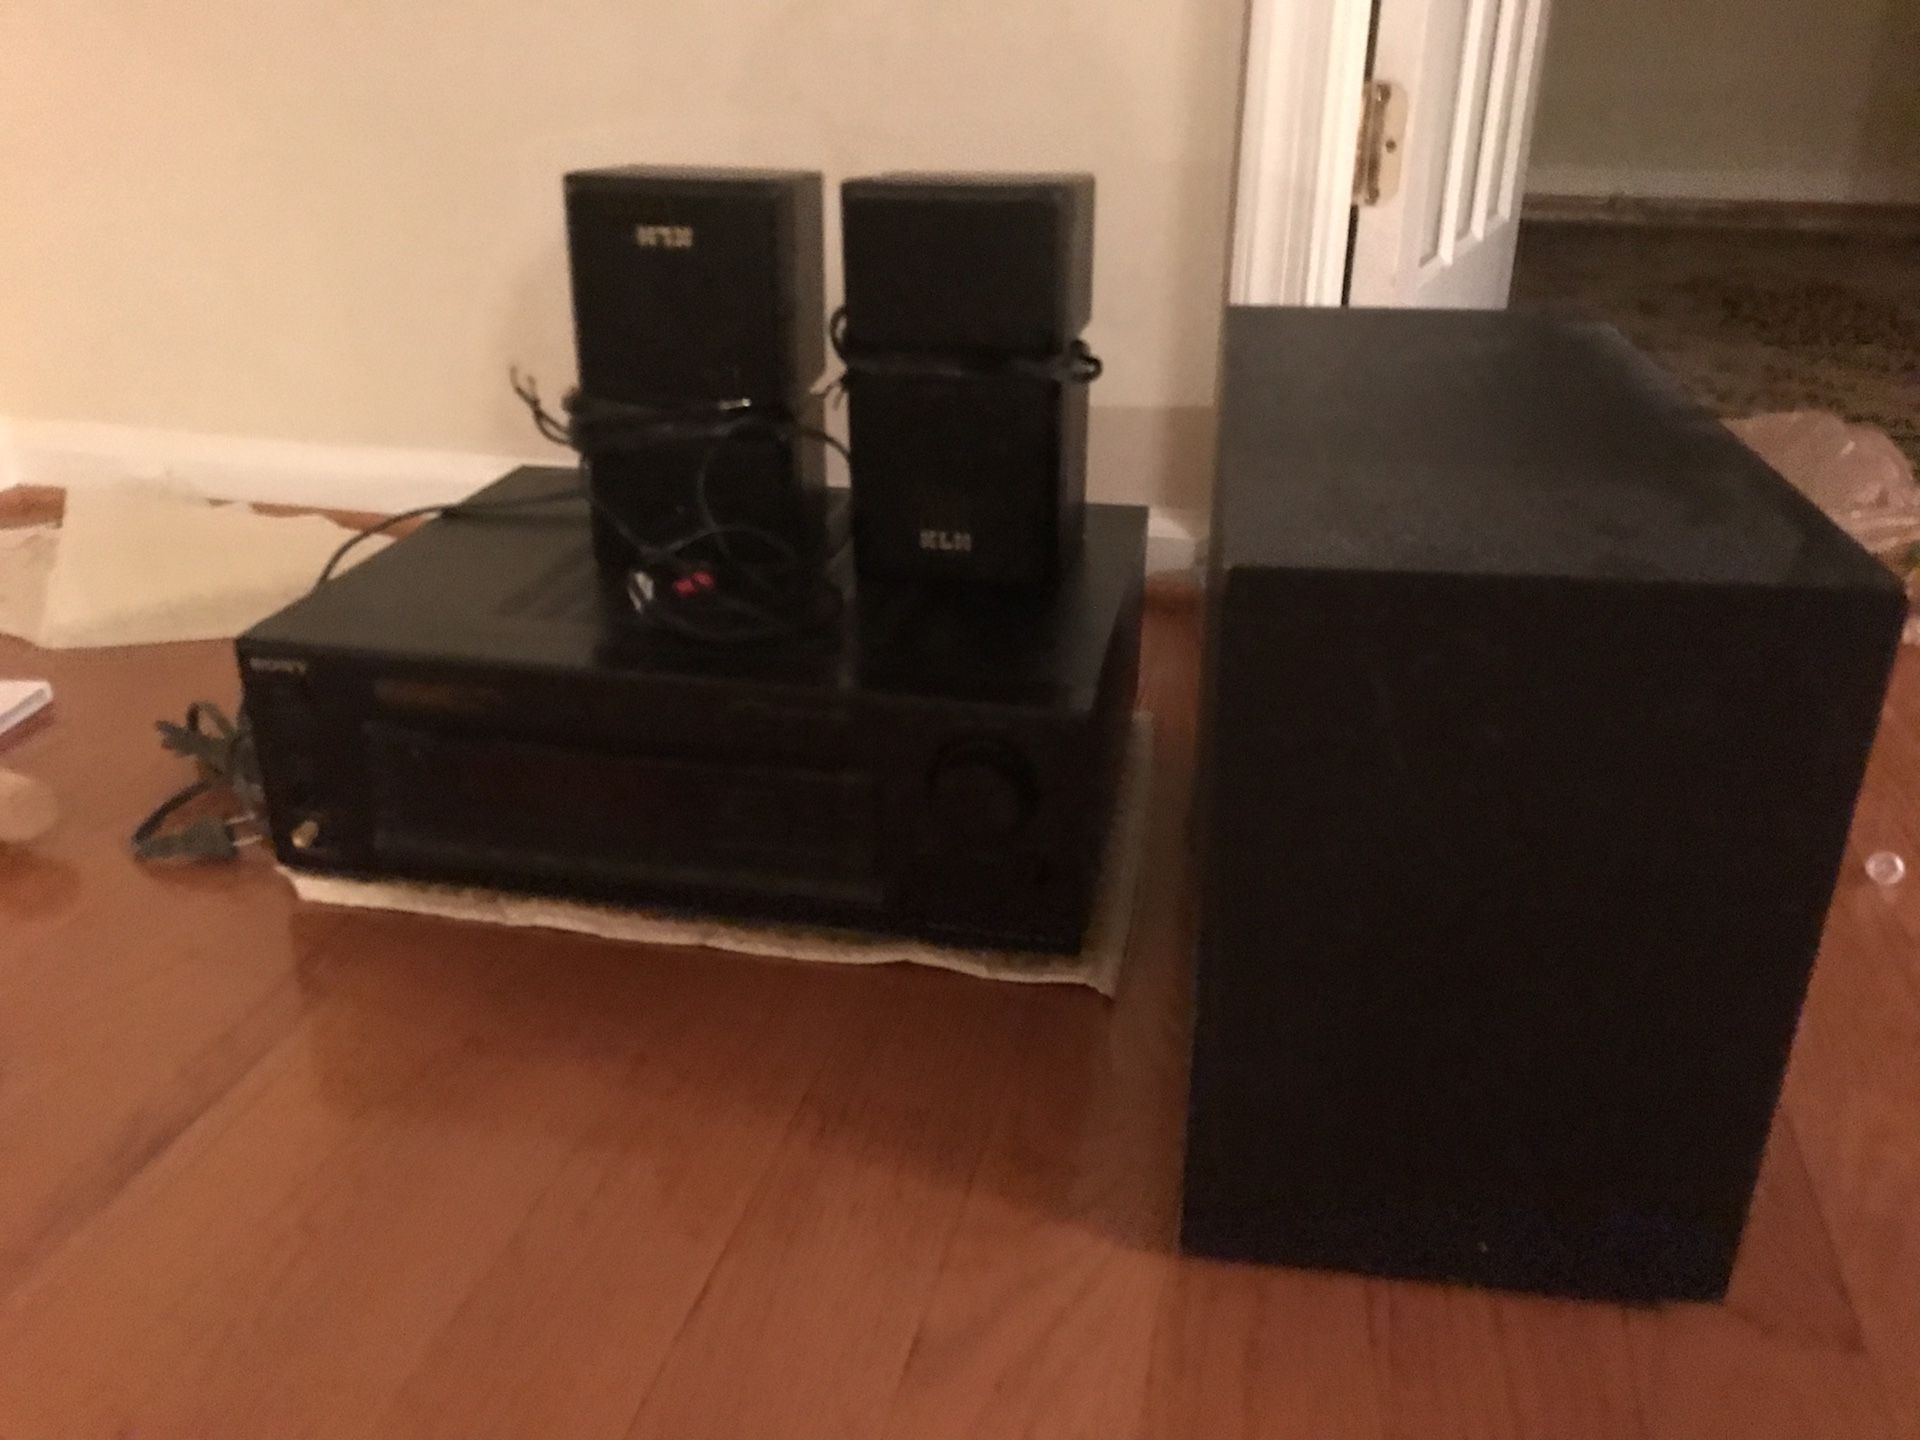 SONY Amplifier, Sub-woofer and 2 KLH Speakers